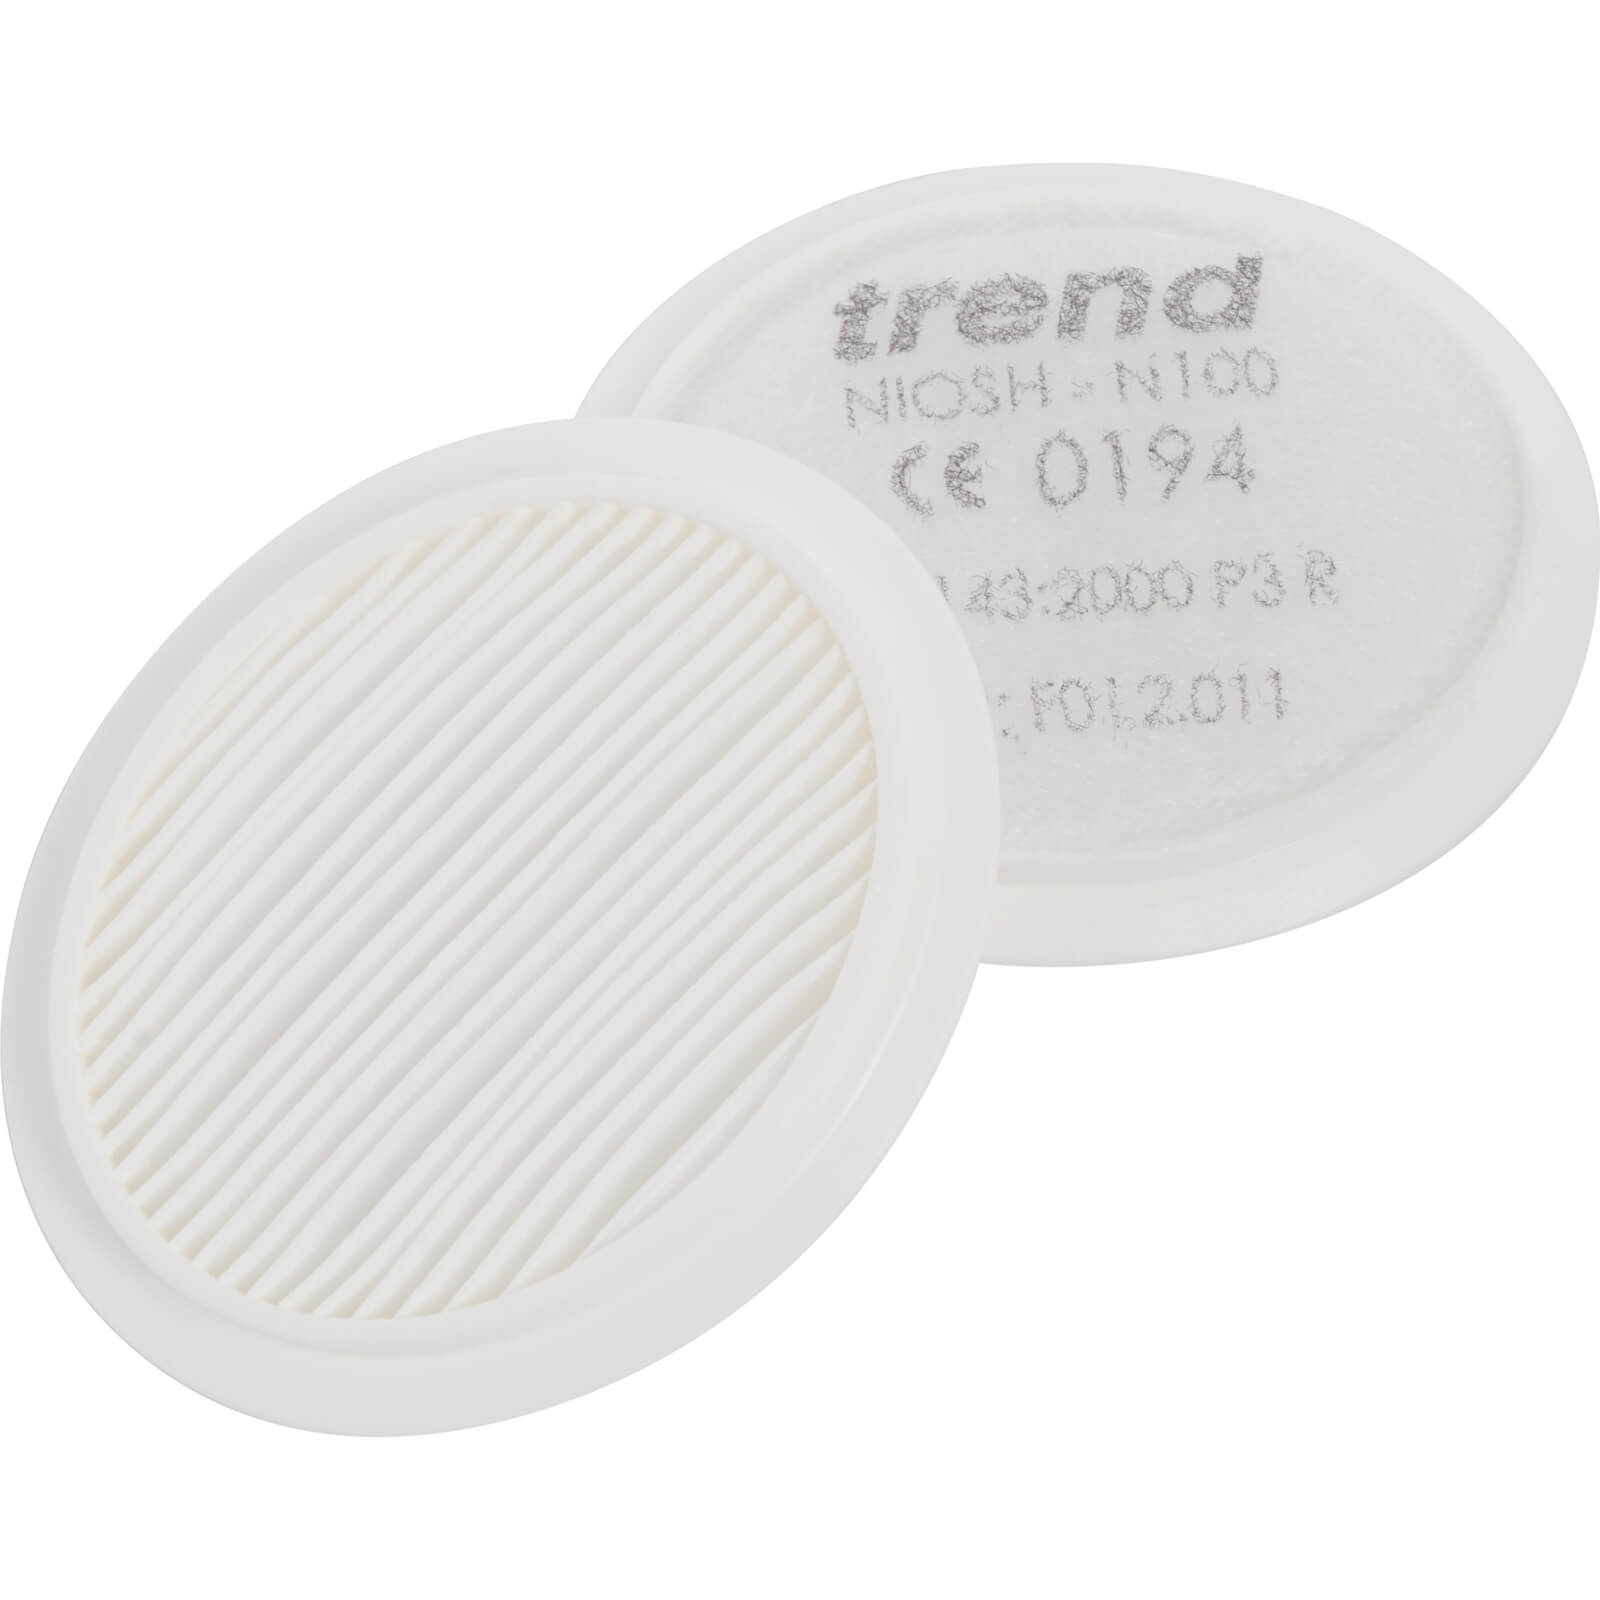 Image of Trend Air Stealth P3 Replacement Filter Pack of 5